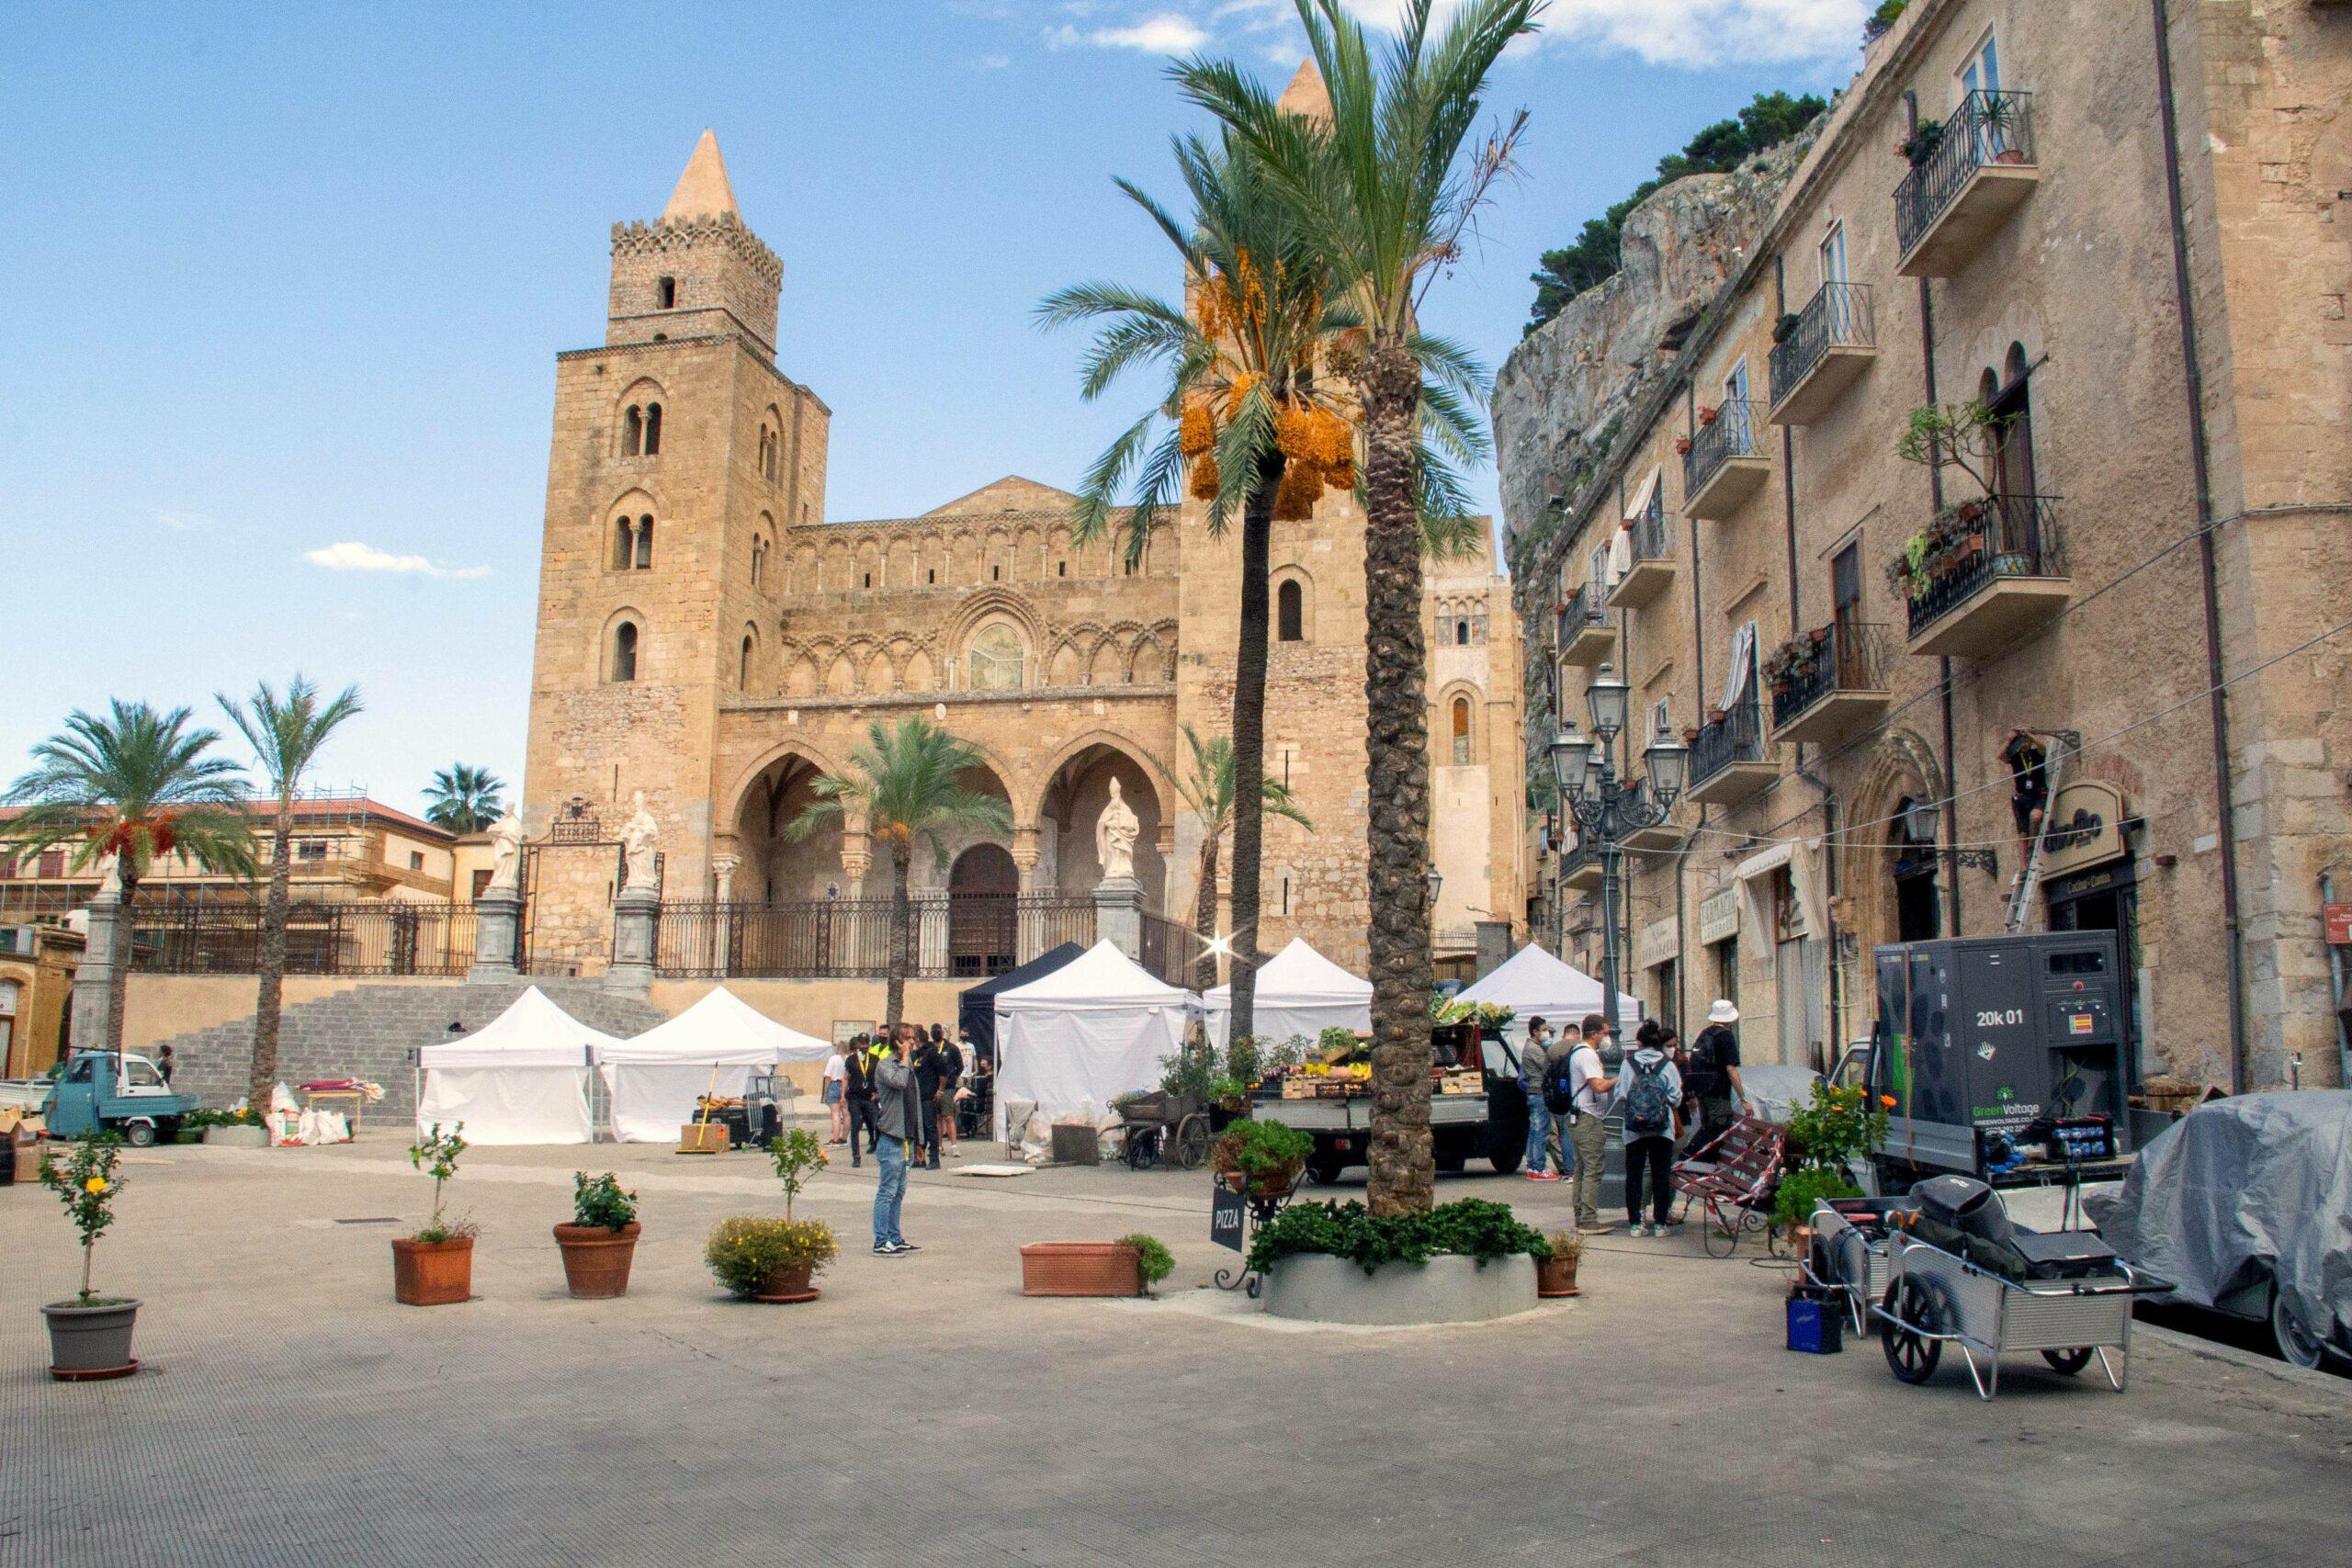 The shot of the set in "Indiana Jones 5" being filmed in Cefalù, Sicily